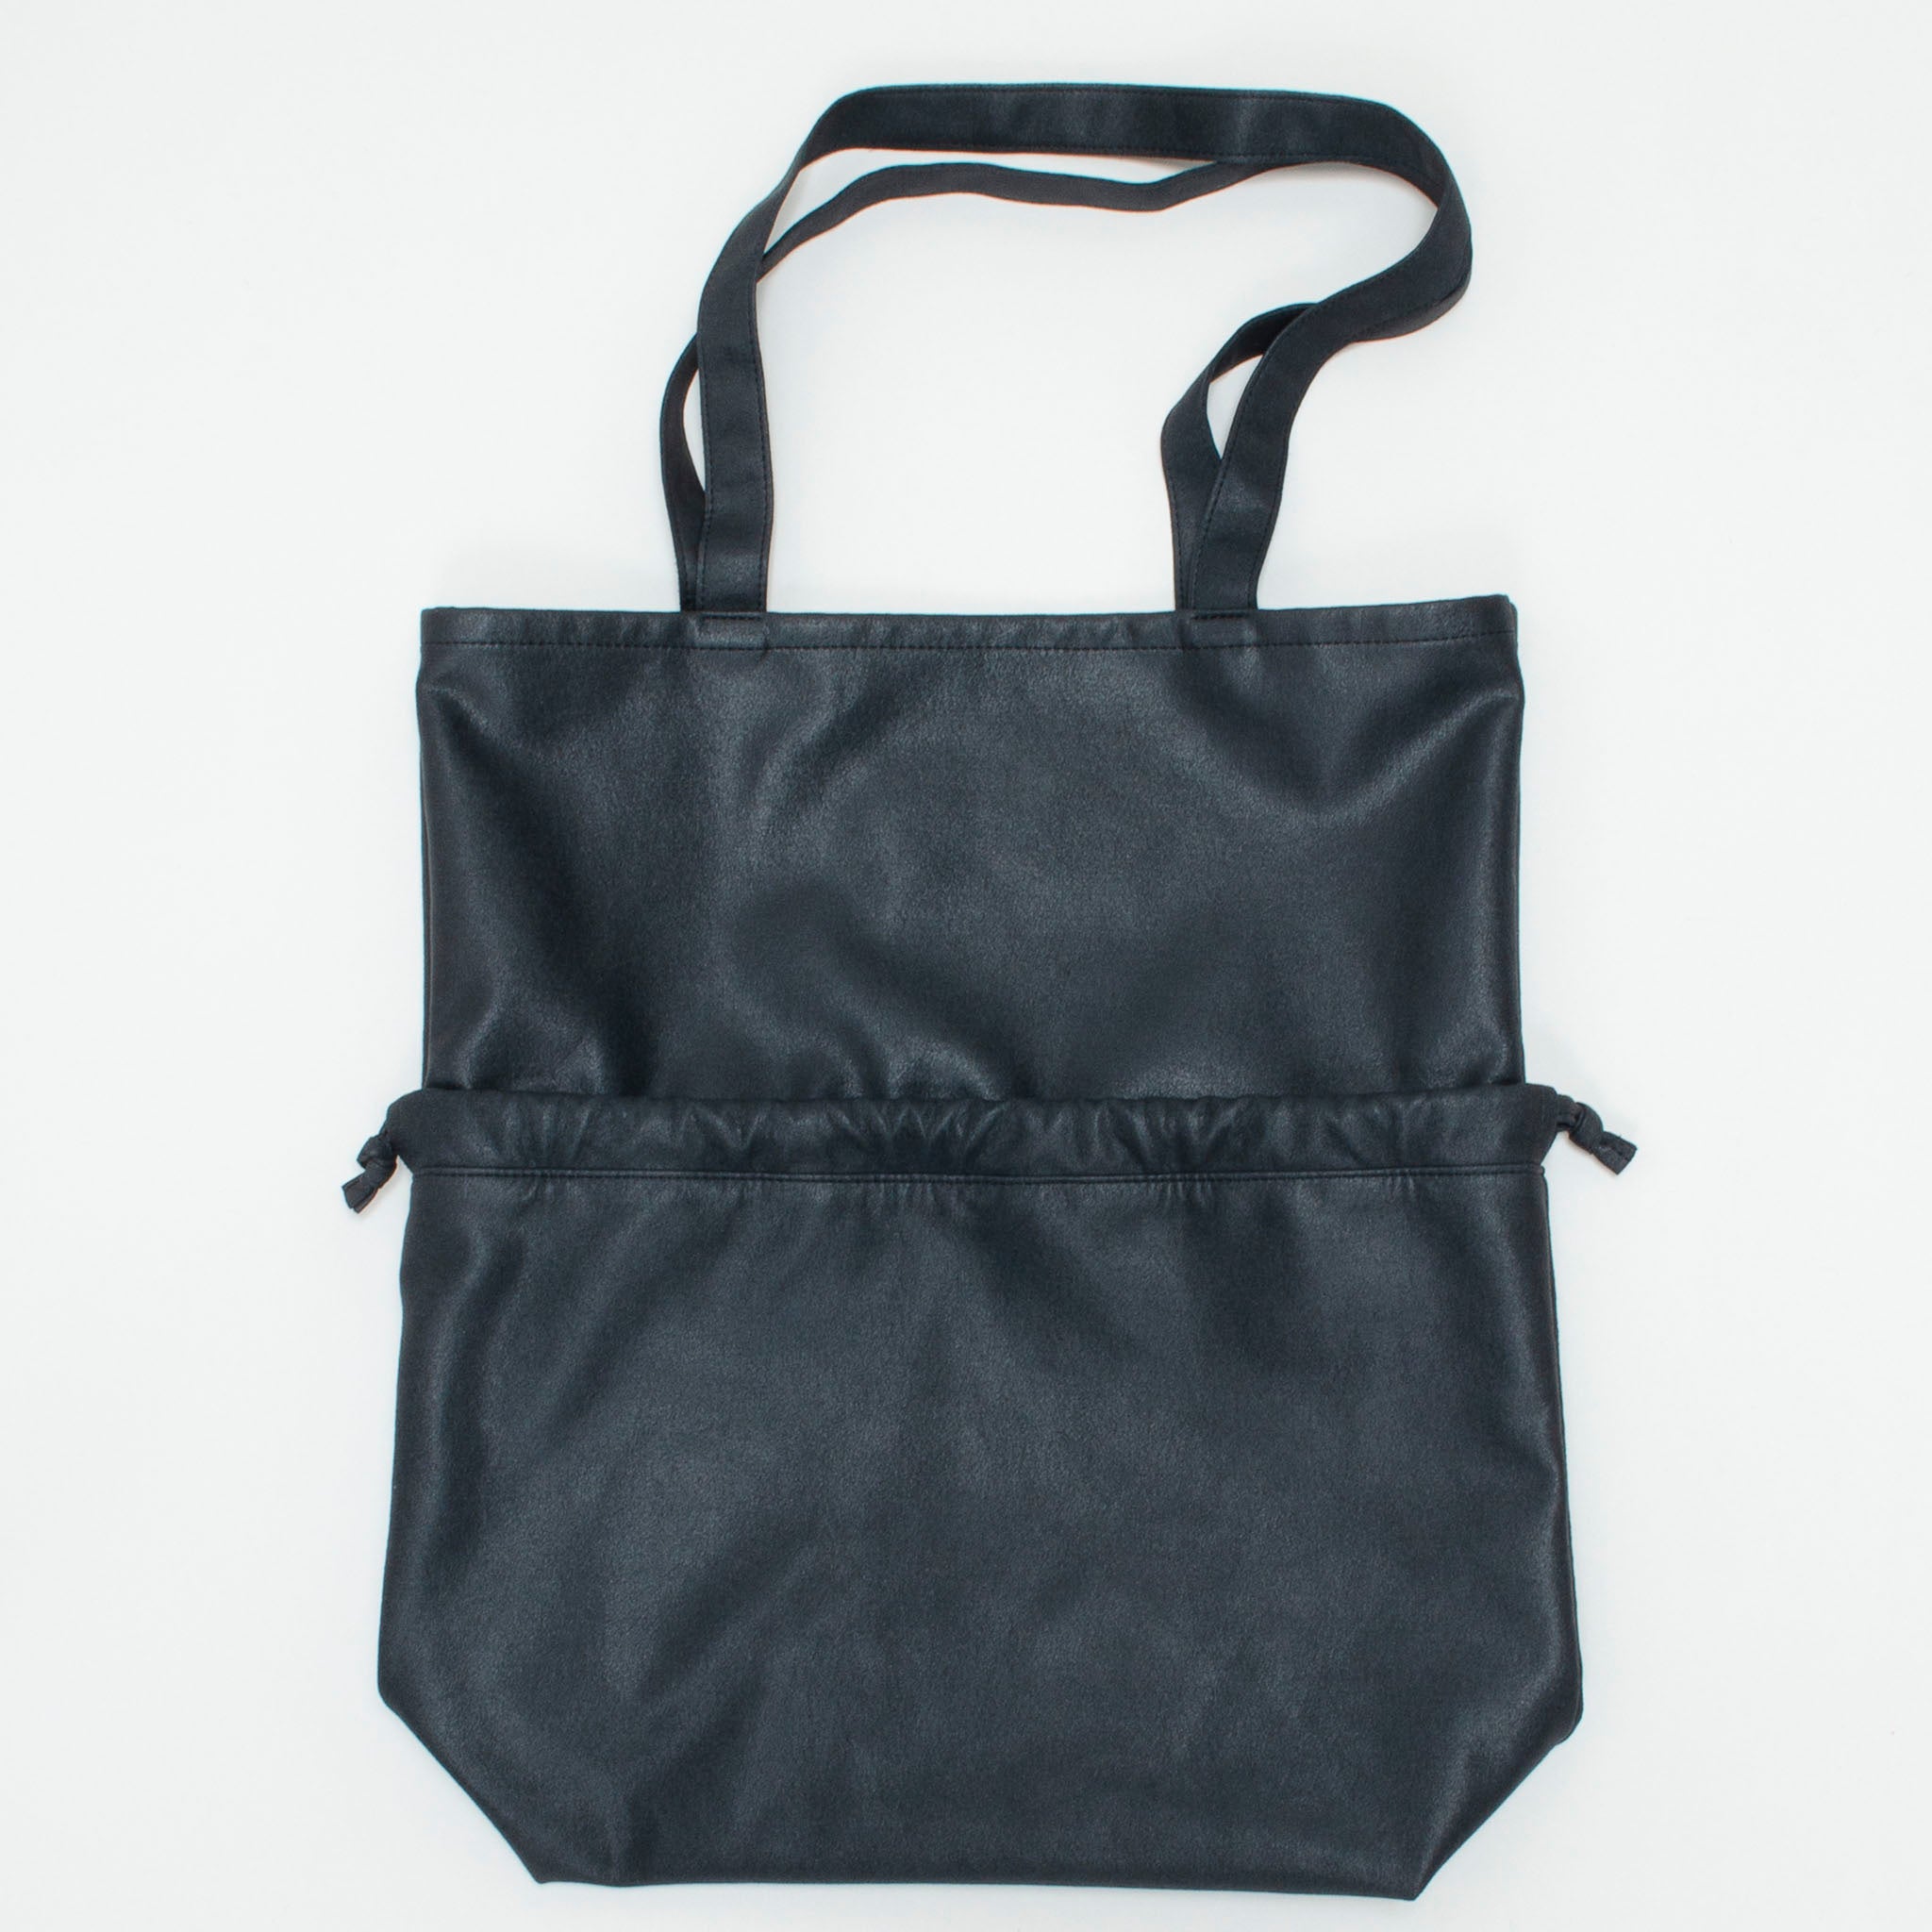 KaILI （カイリ）NOT COMPACT ECOBAG UN検討させていただきます